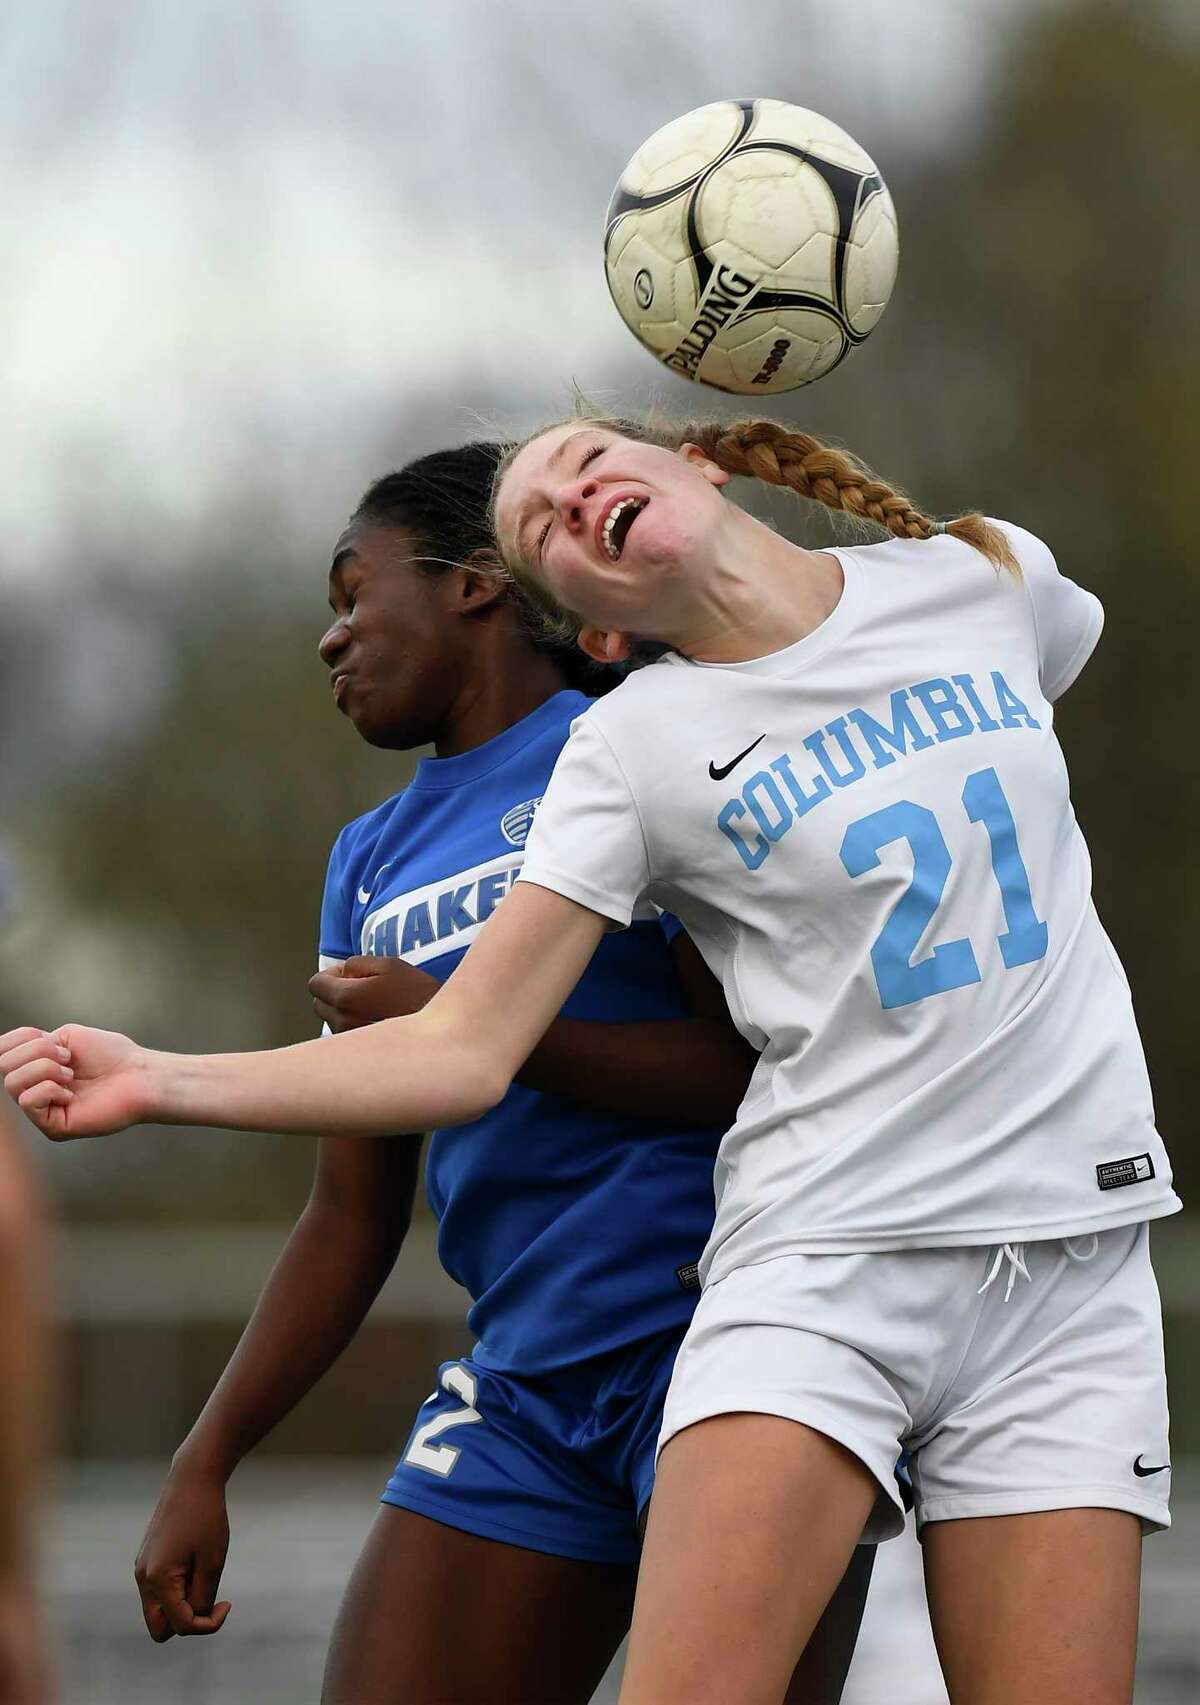 Columbia’s Ella Hebler (21) heads the ball while being defended by Shaker’s Vivian Nartey (22) during their Class AA girls' soccer semifinal last year.